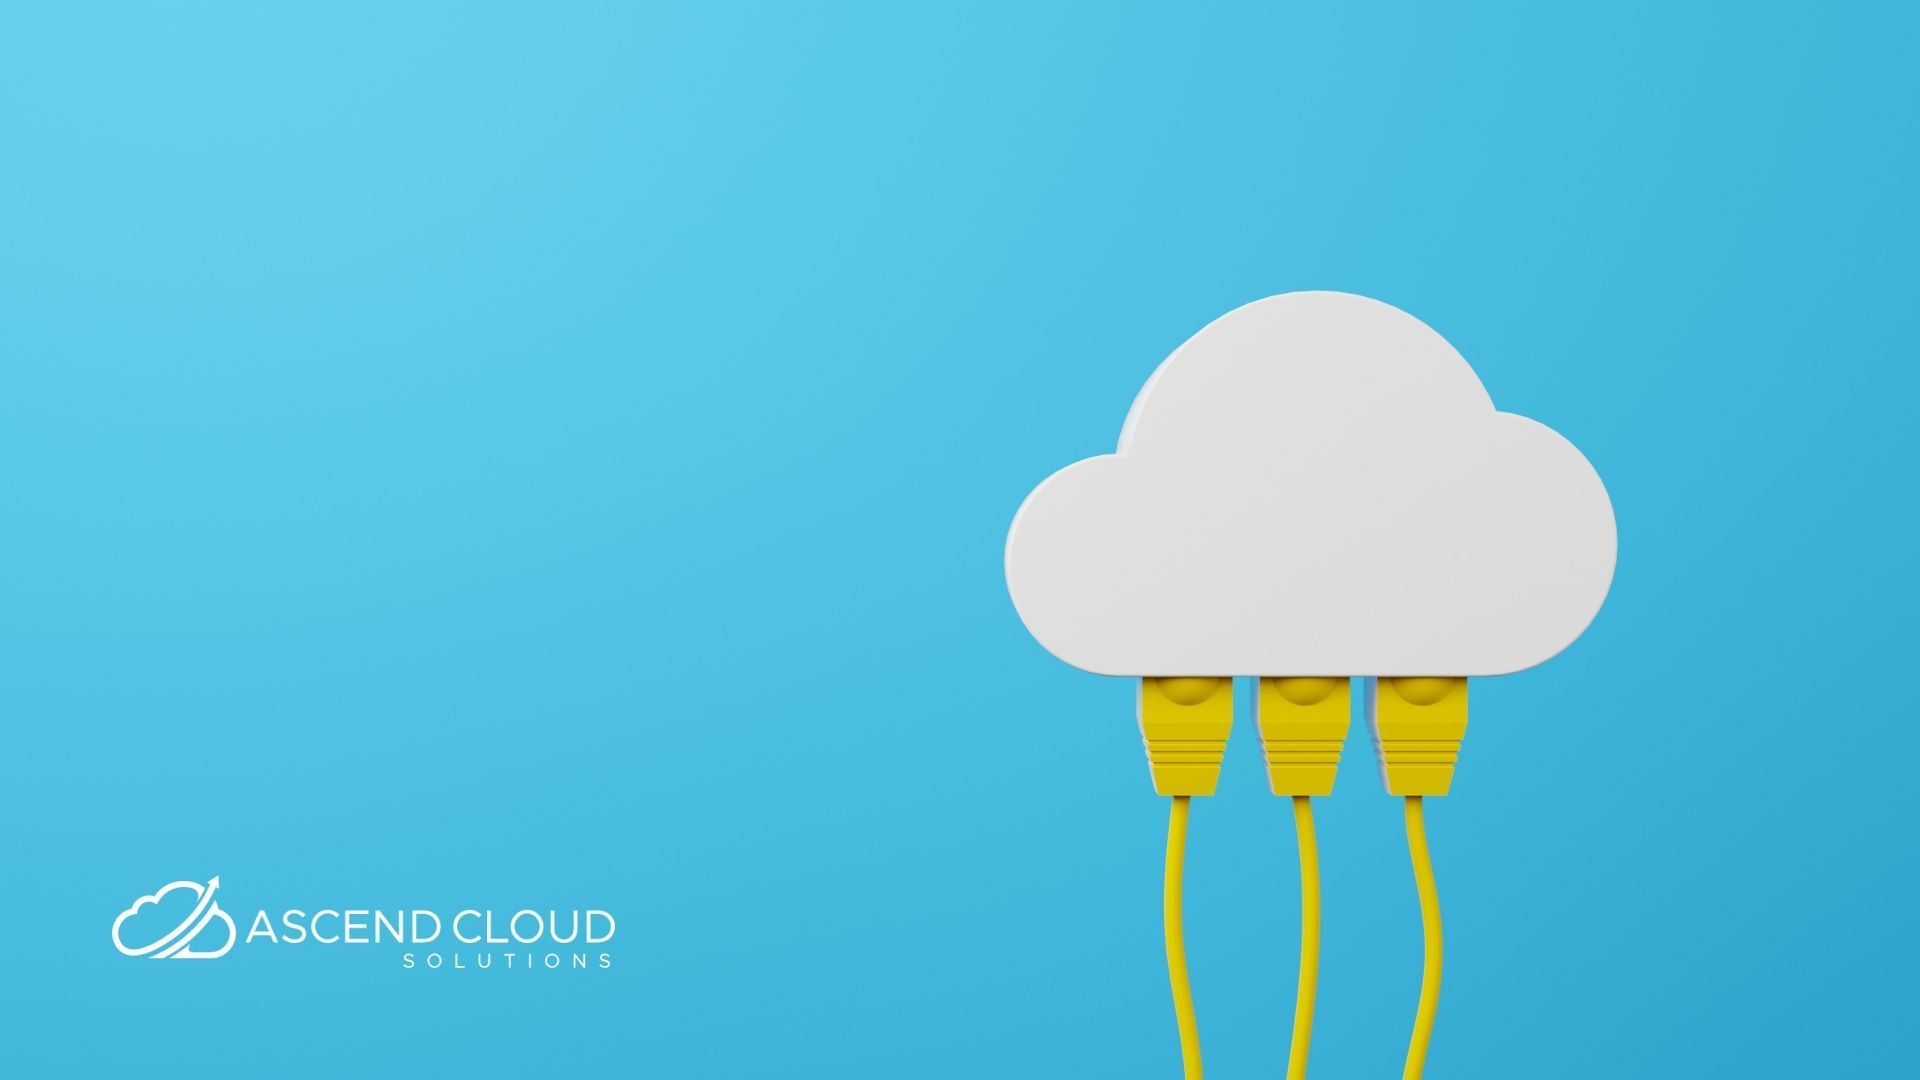 A white cloud is connected to three yellow wires on a blue background.